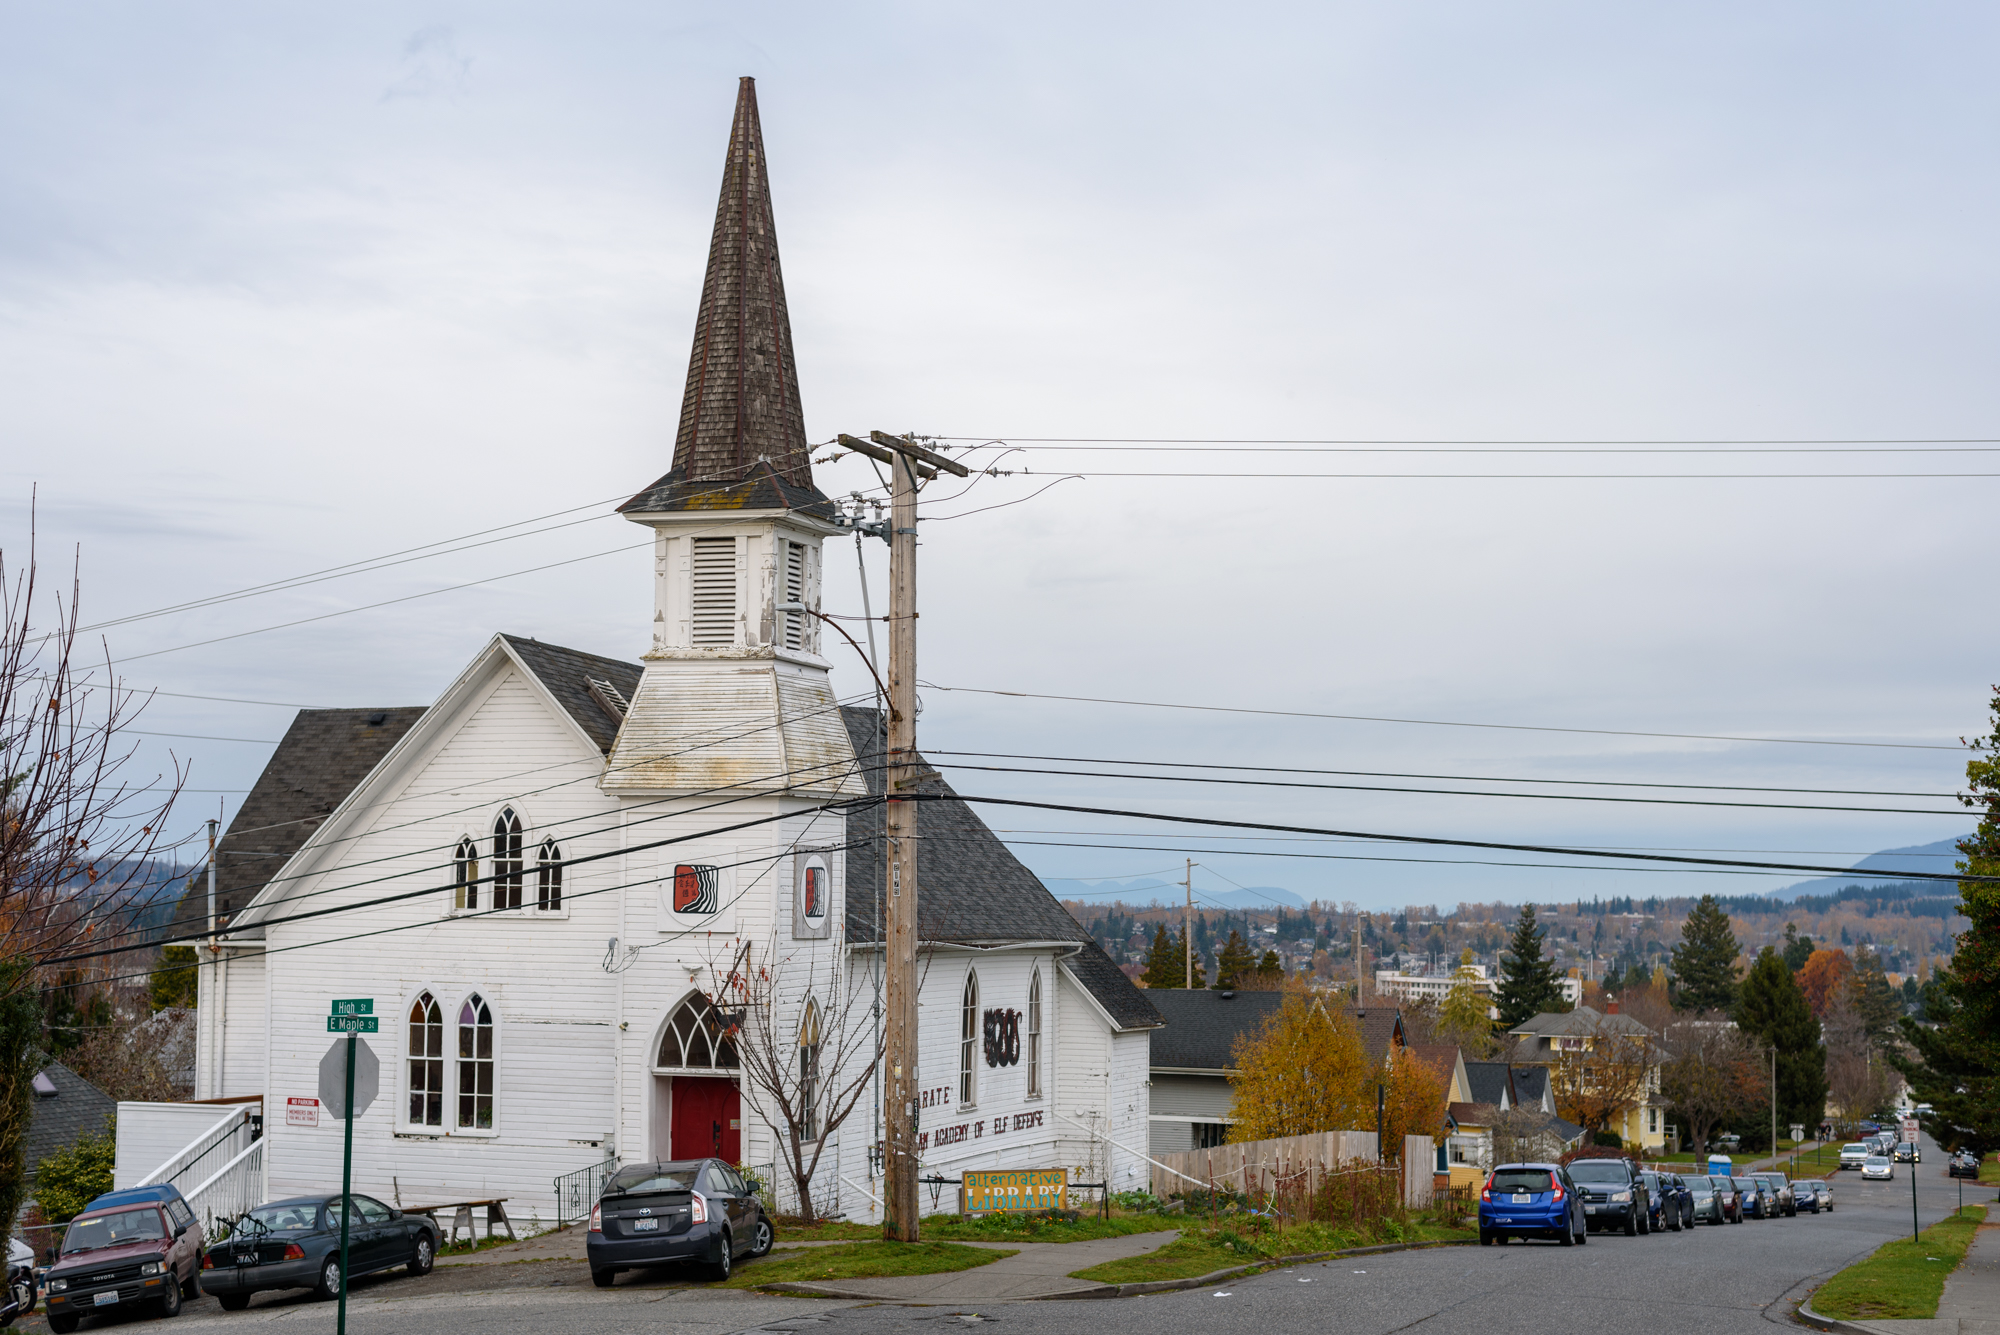 Image of the exterior of the Alternative Library, the building is an old church with a steeple. In front of the building is a sign that reads “Alternative Library”.